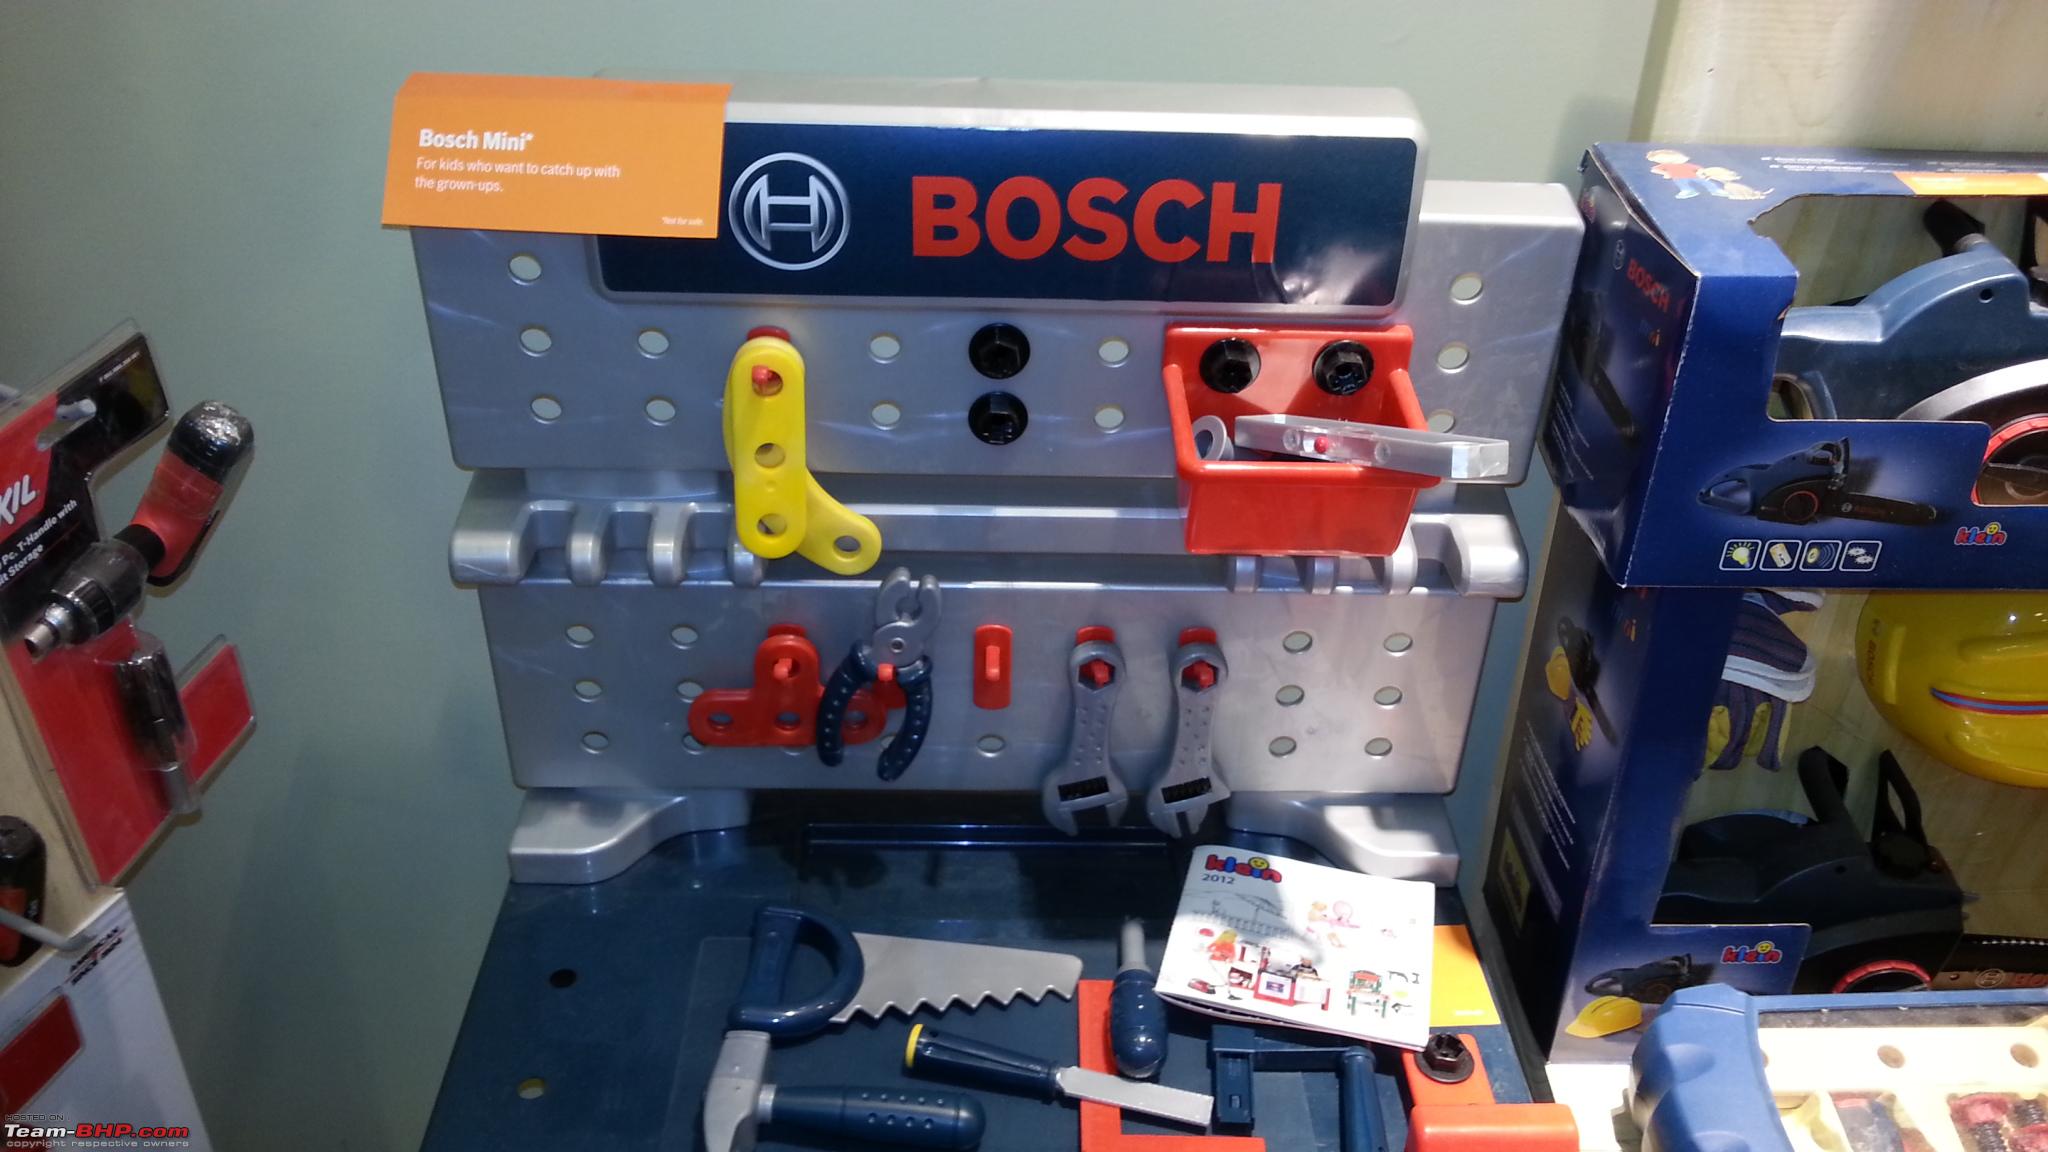 Bosch Diy Square Try Buy Professional Tools Team Bhp